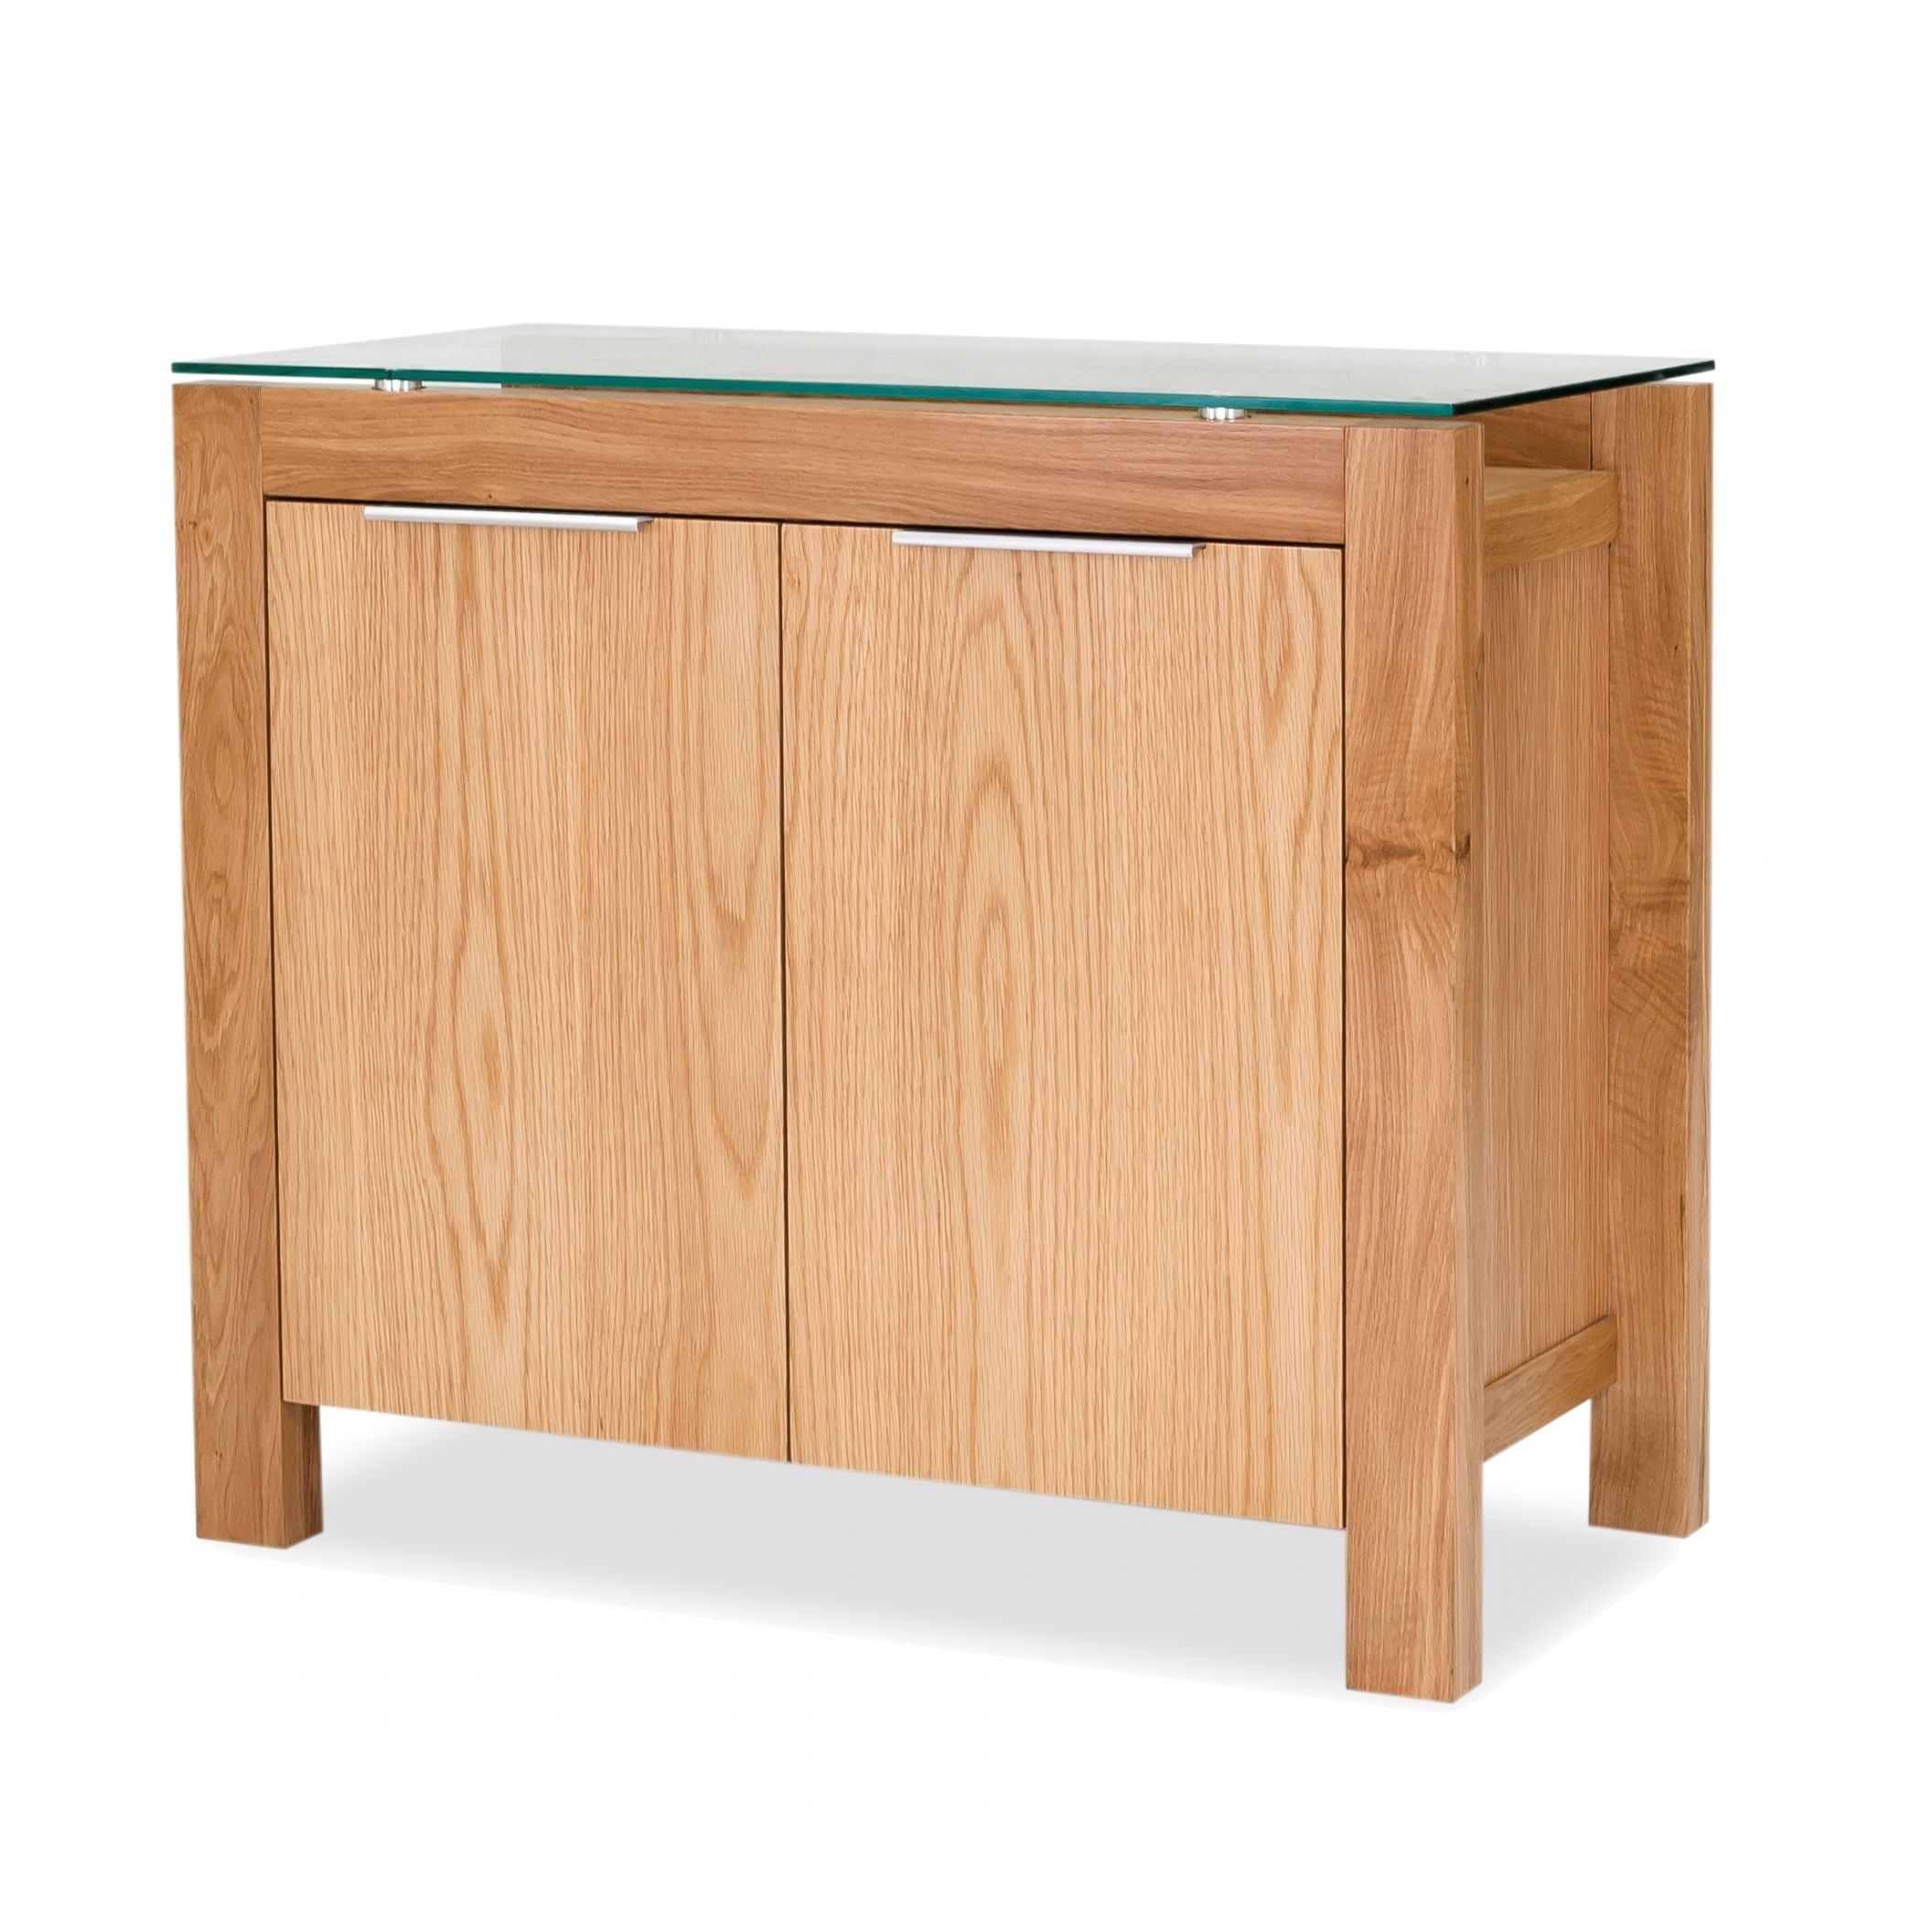 Tribeca Oak Sideboard With Regard To Tribeca Sideboards (View 13 of 20)